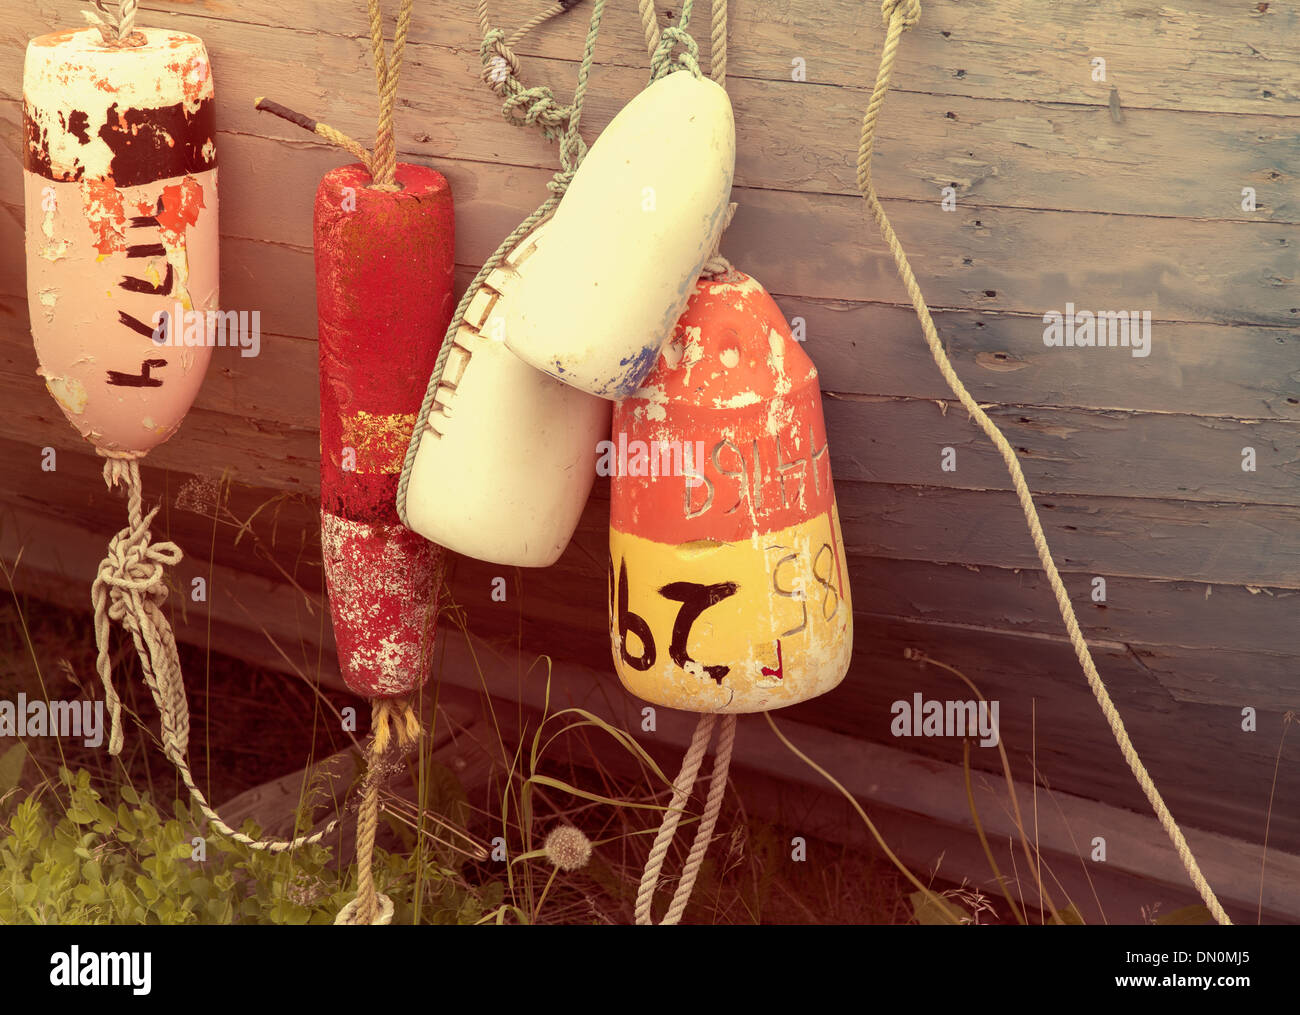 Old fishing buoy floats hanging off a wooden boat Stock Photo - Alamy